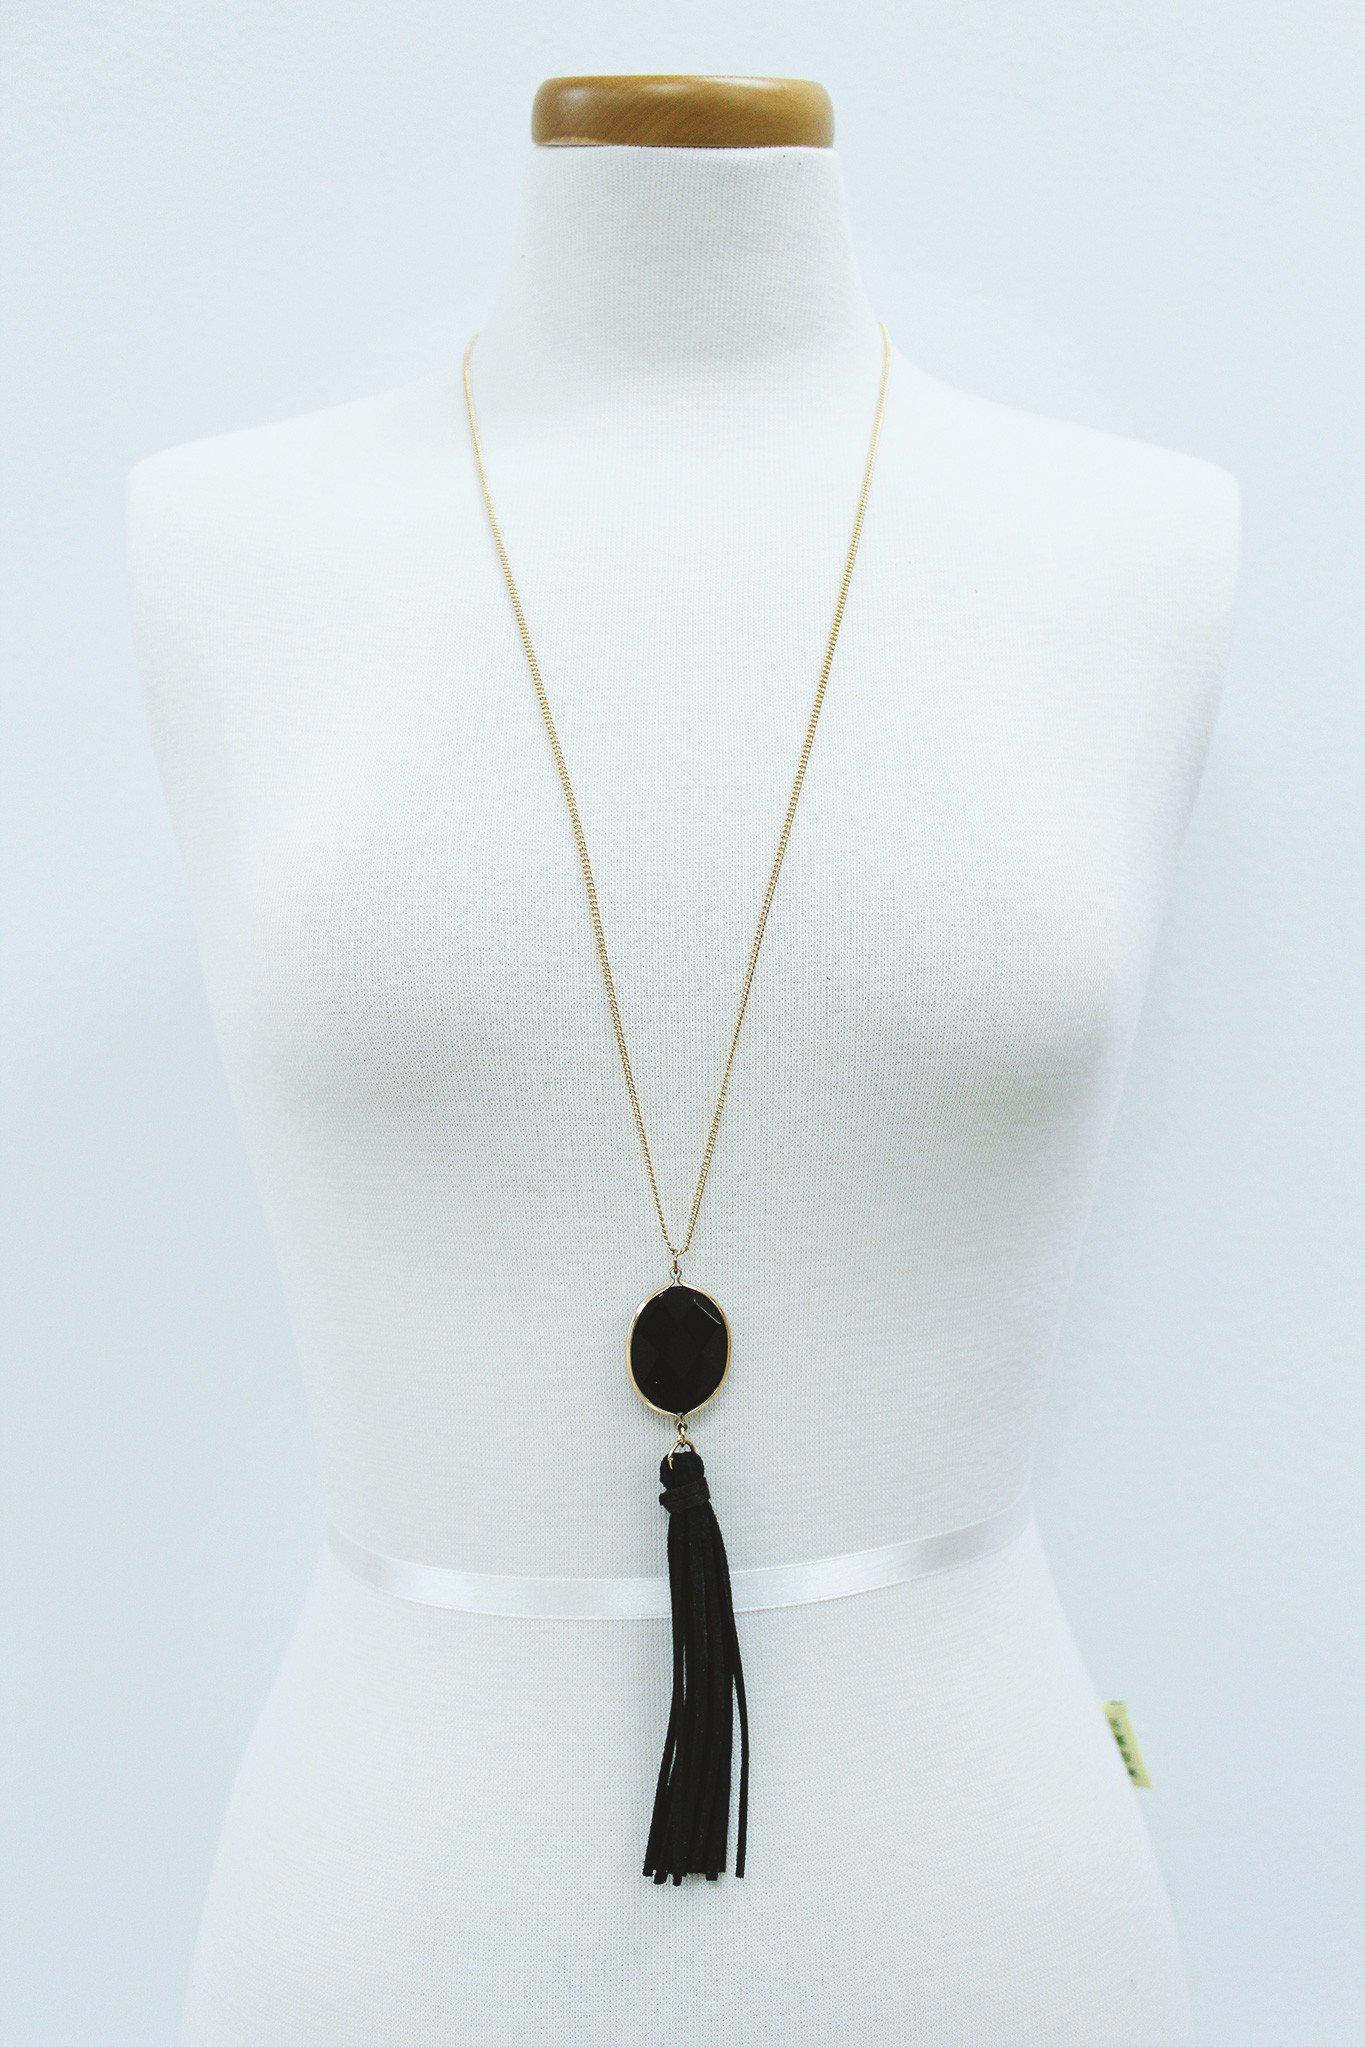 gold necklace with black stone and tassel